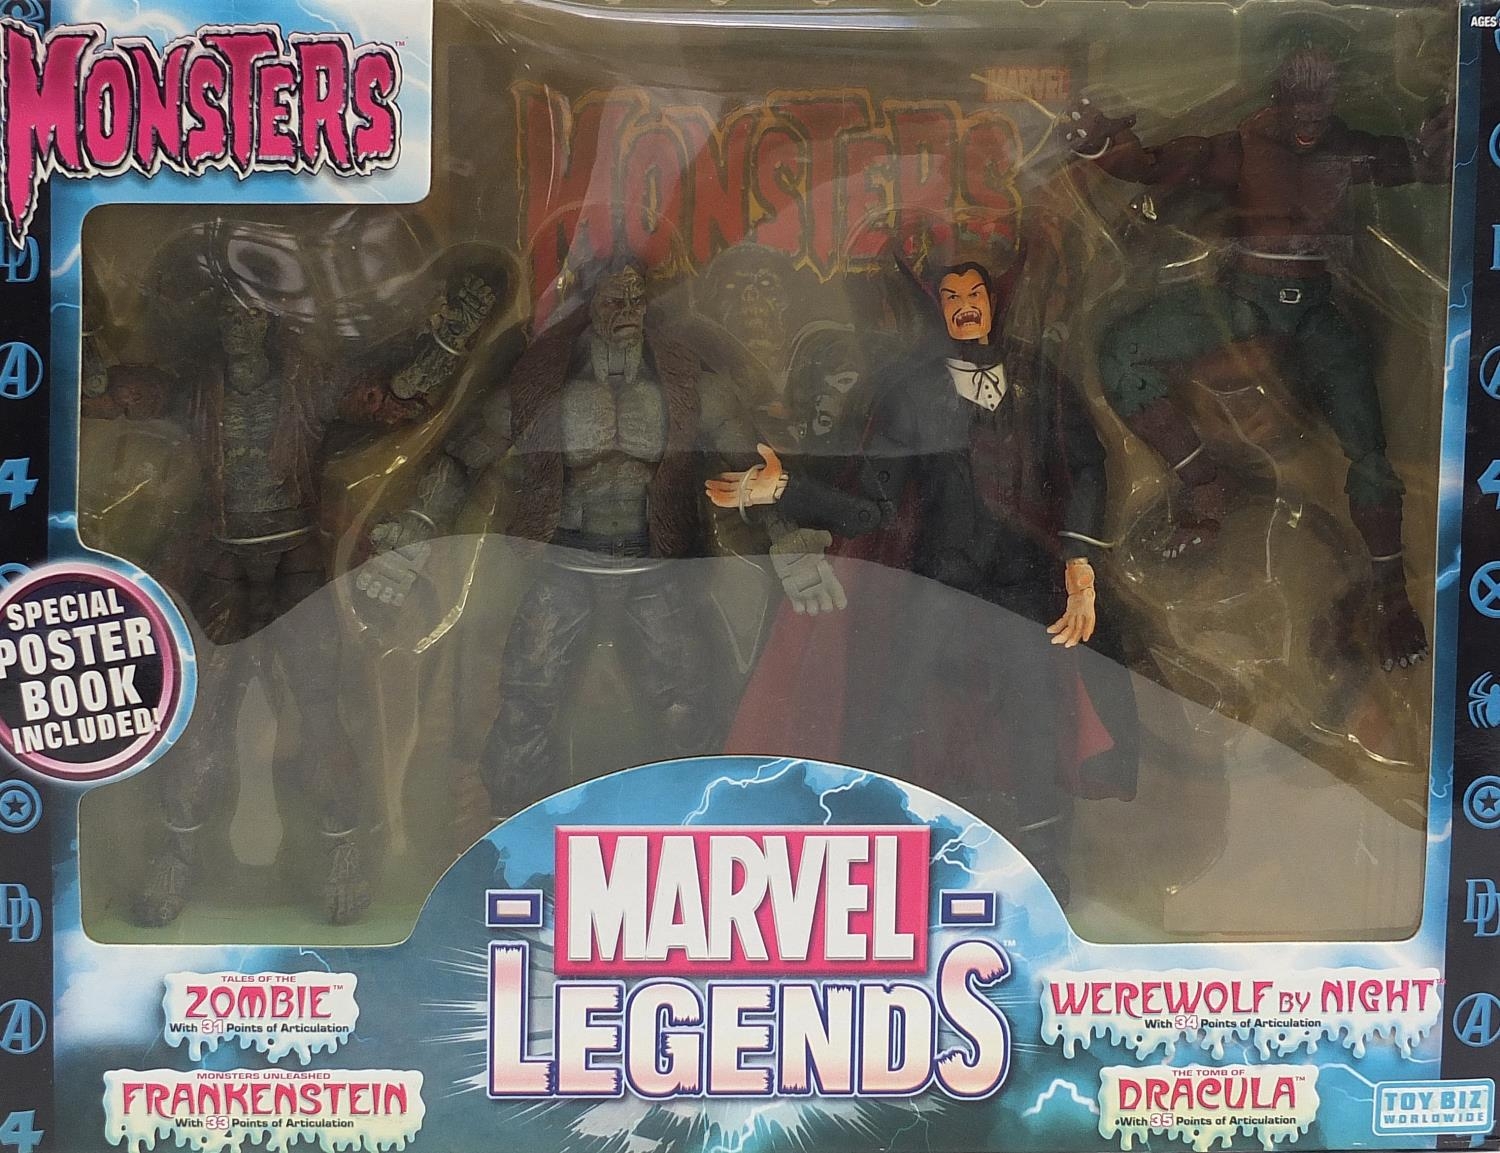 Marvel Legends Monsters action figure set by Toy Biz with box - Image 2 of 3